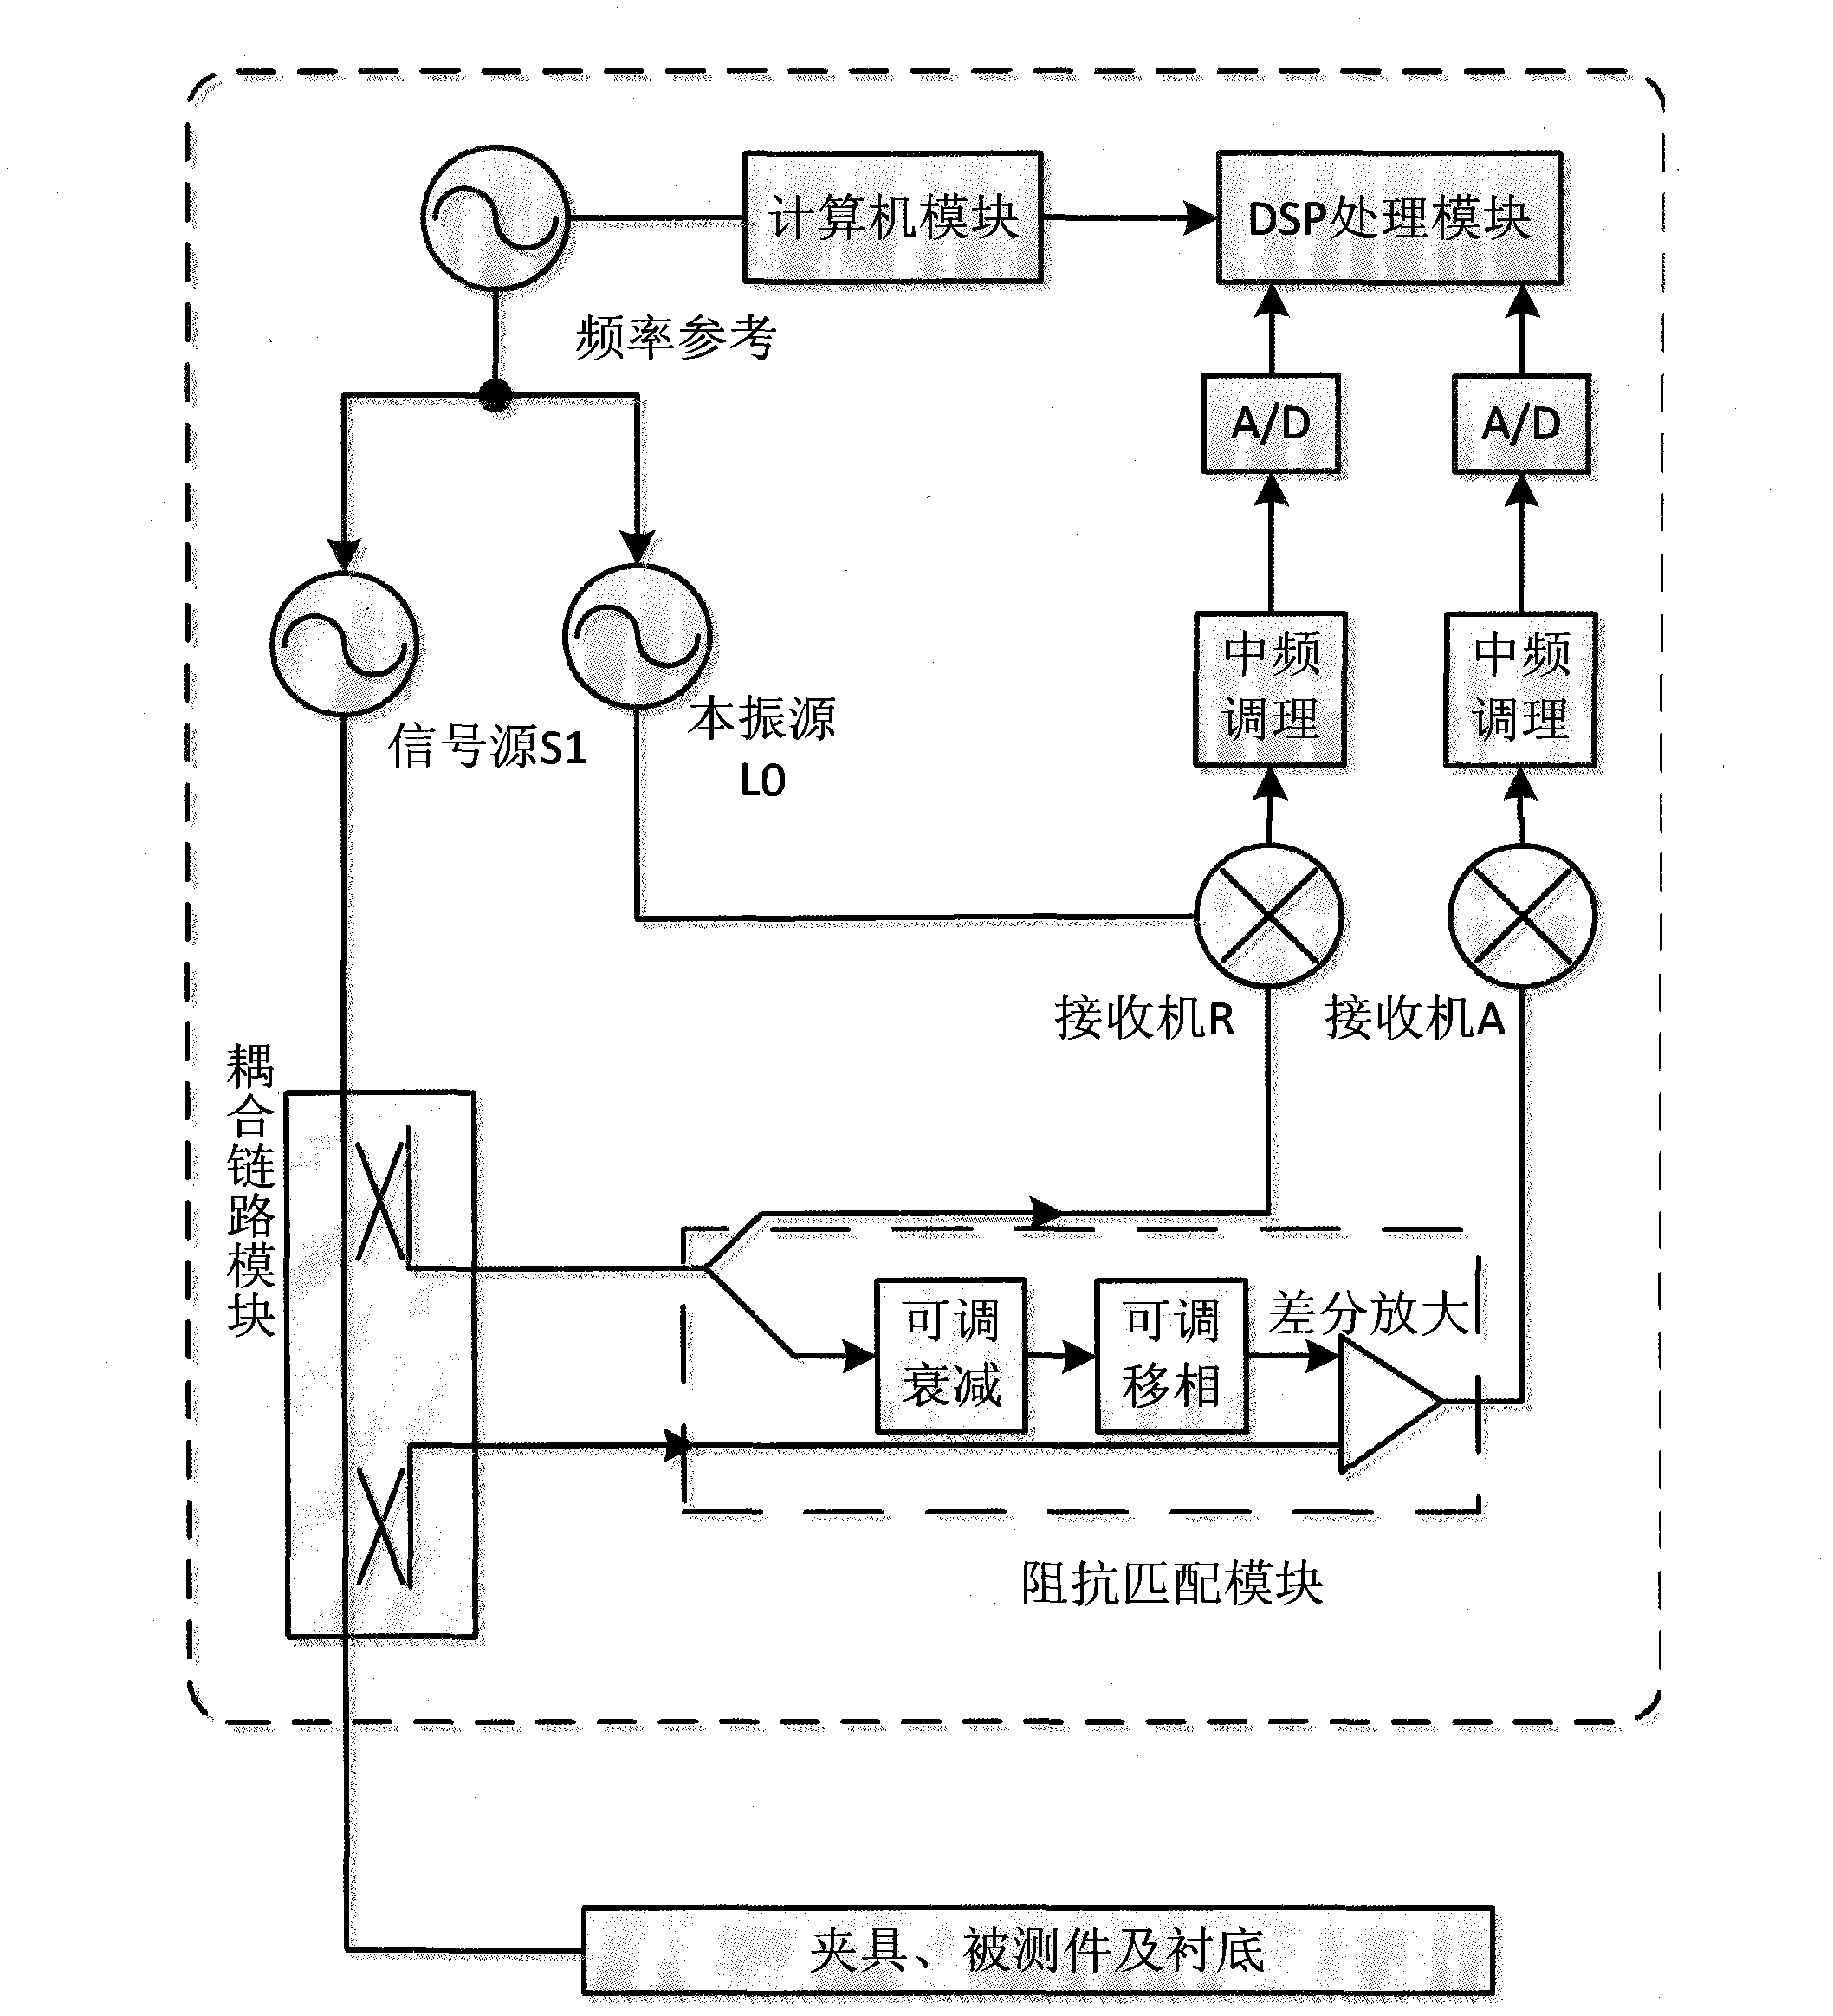 Random impedance testing circuit and method for vector network analyzer material testing